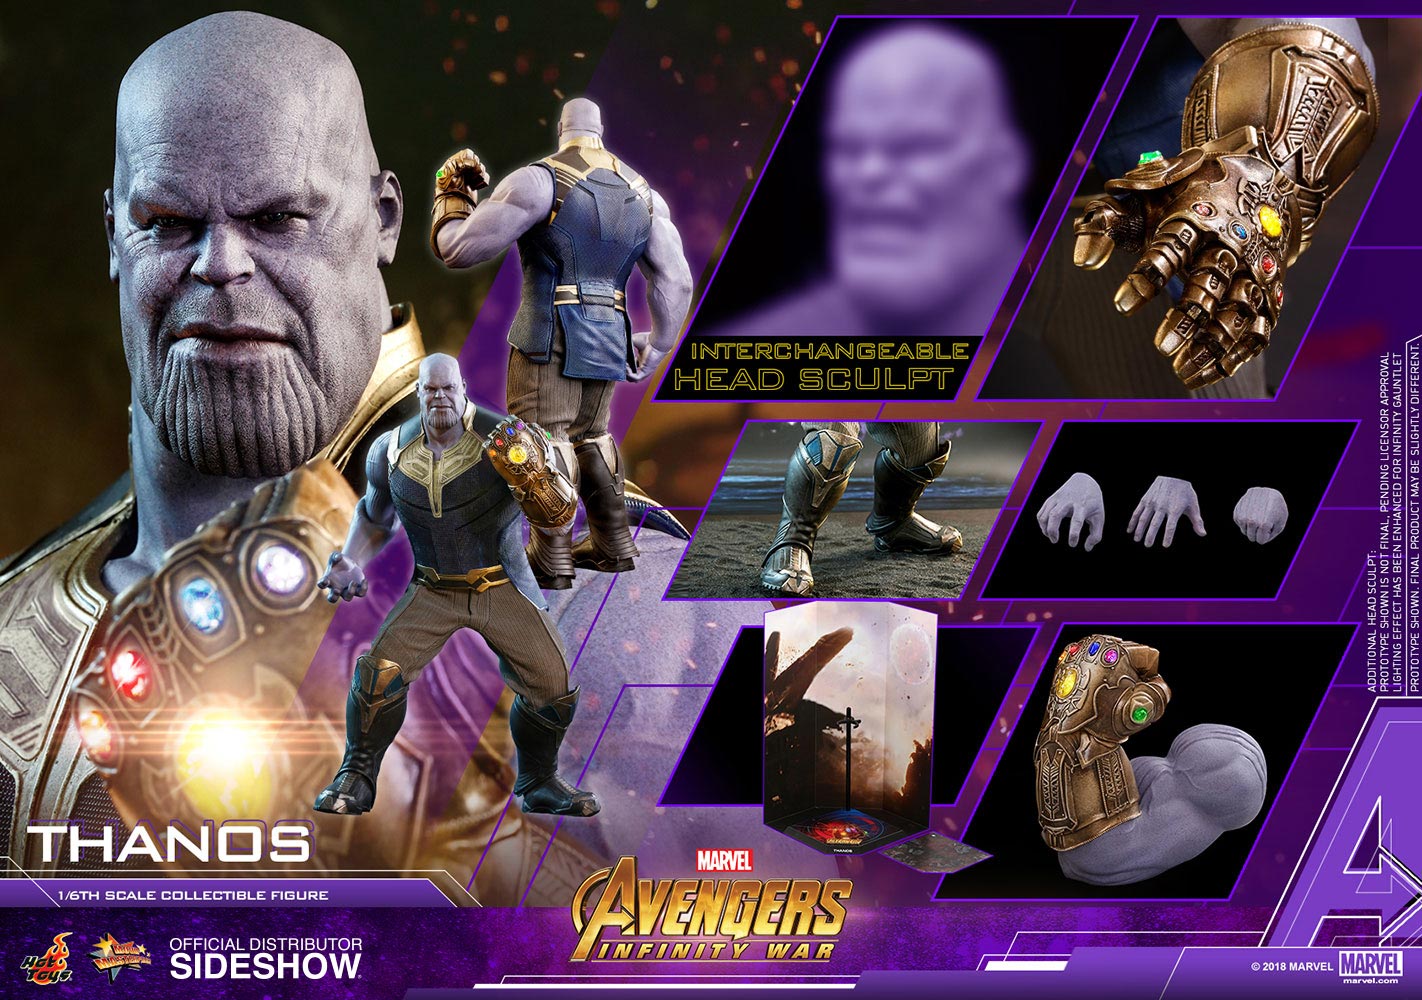 Thanos Sixth Scale Collectible Figure